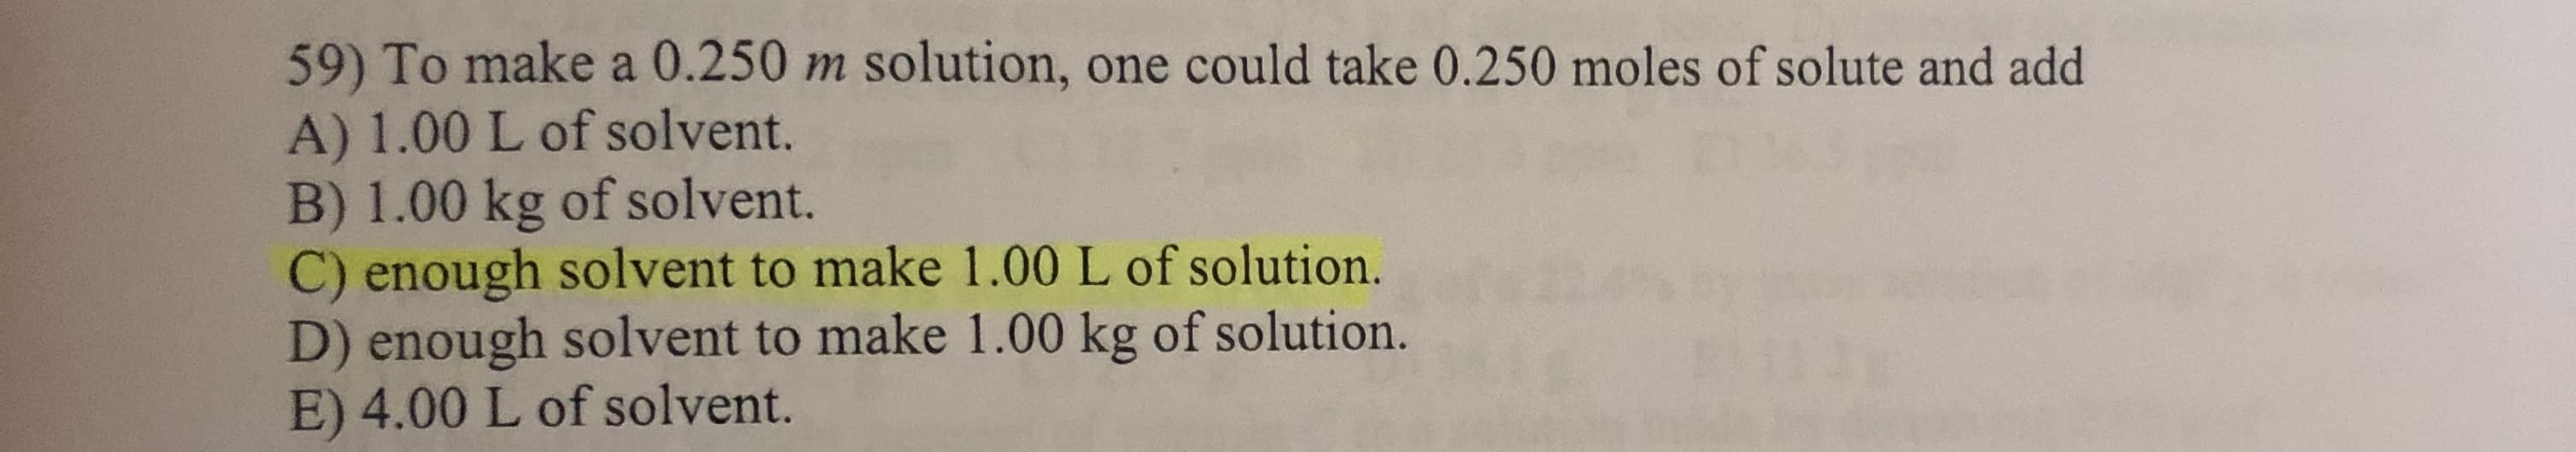 59) To make a 0.250 m solution, one could take 0.250 moles of solute and add
A) 1.00 L of solvent.
B) 1.00 kg of solvent.
C) enough solvent to make 1.00 L of solution.
D) enough solvent to make 1.00 kg of solution.
E) 4.00 L of solvent.
